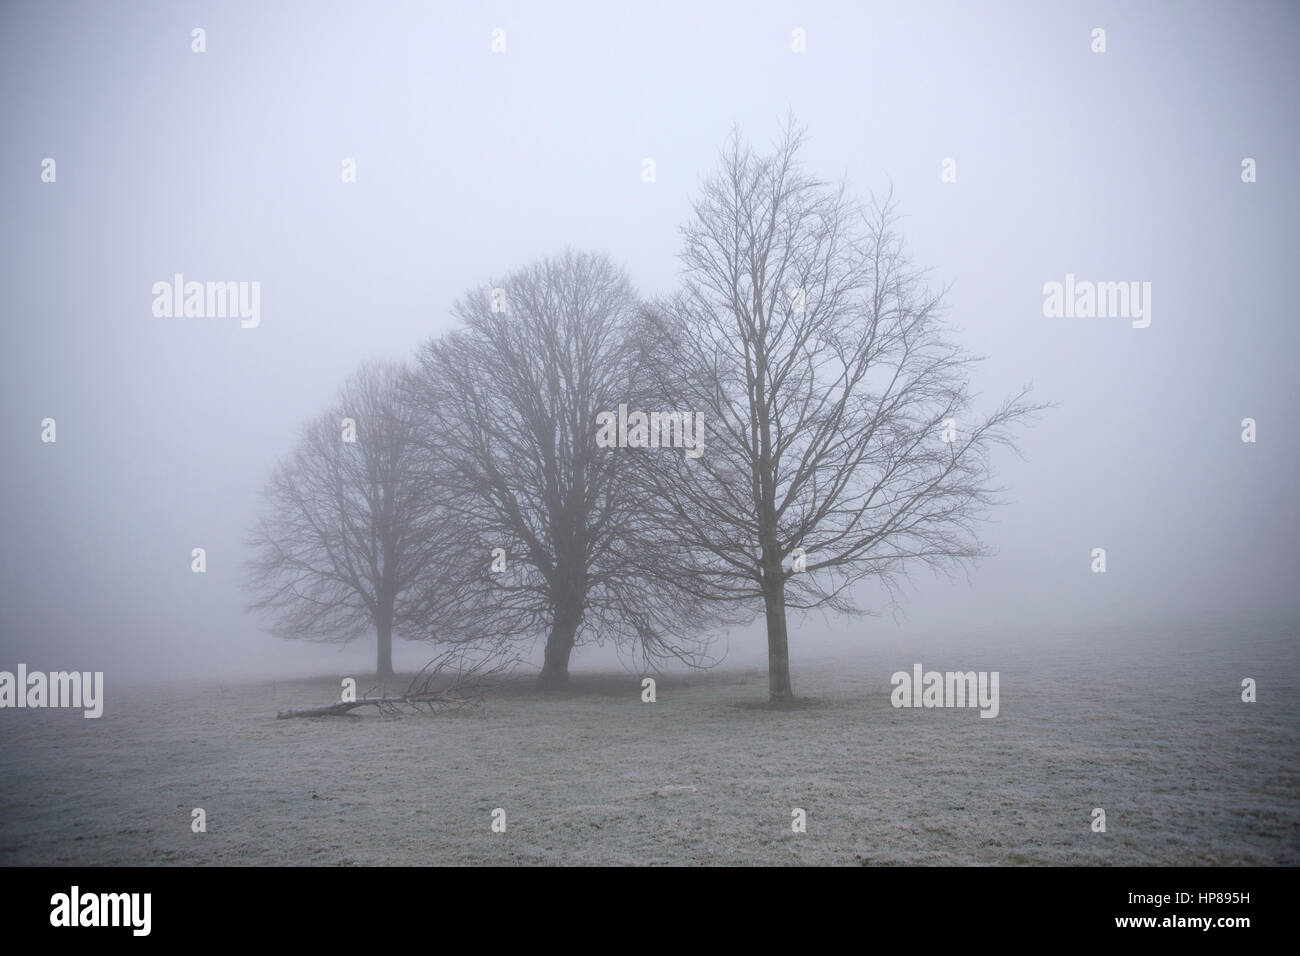 Three young trees in freezing fog Stock Photo